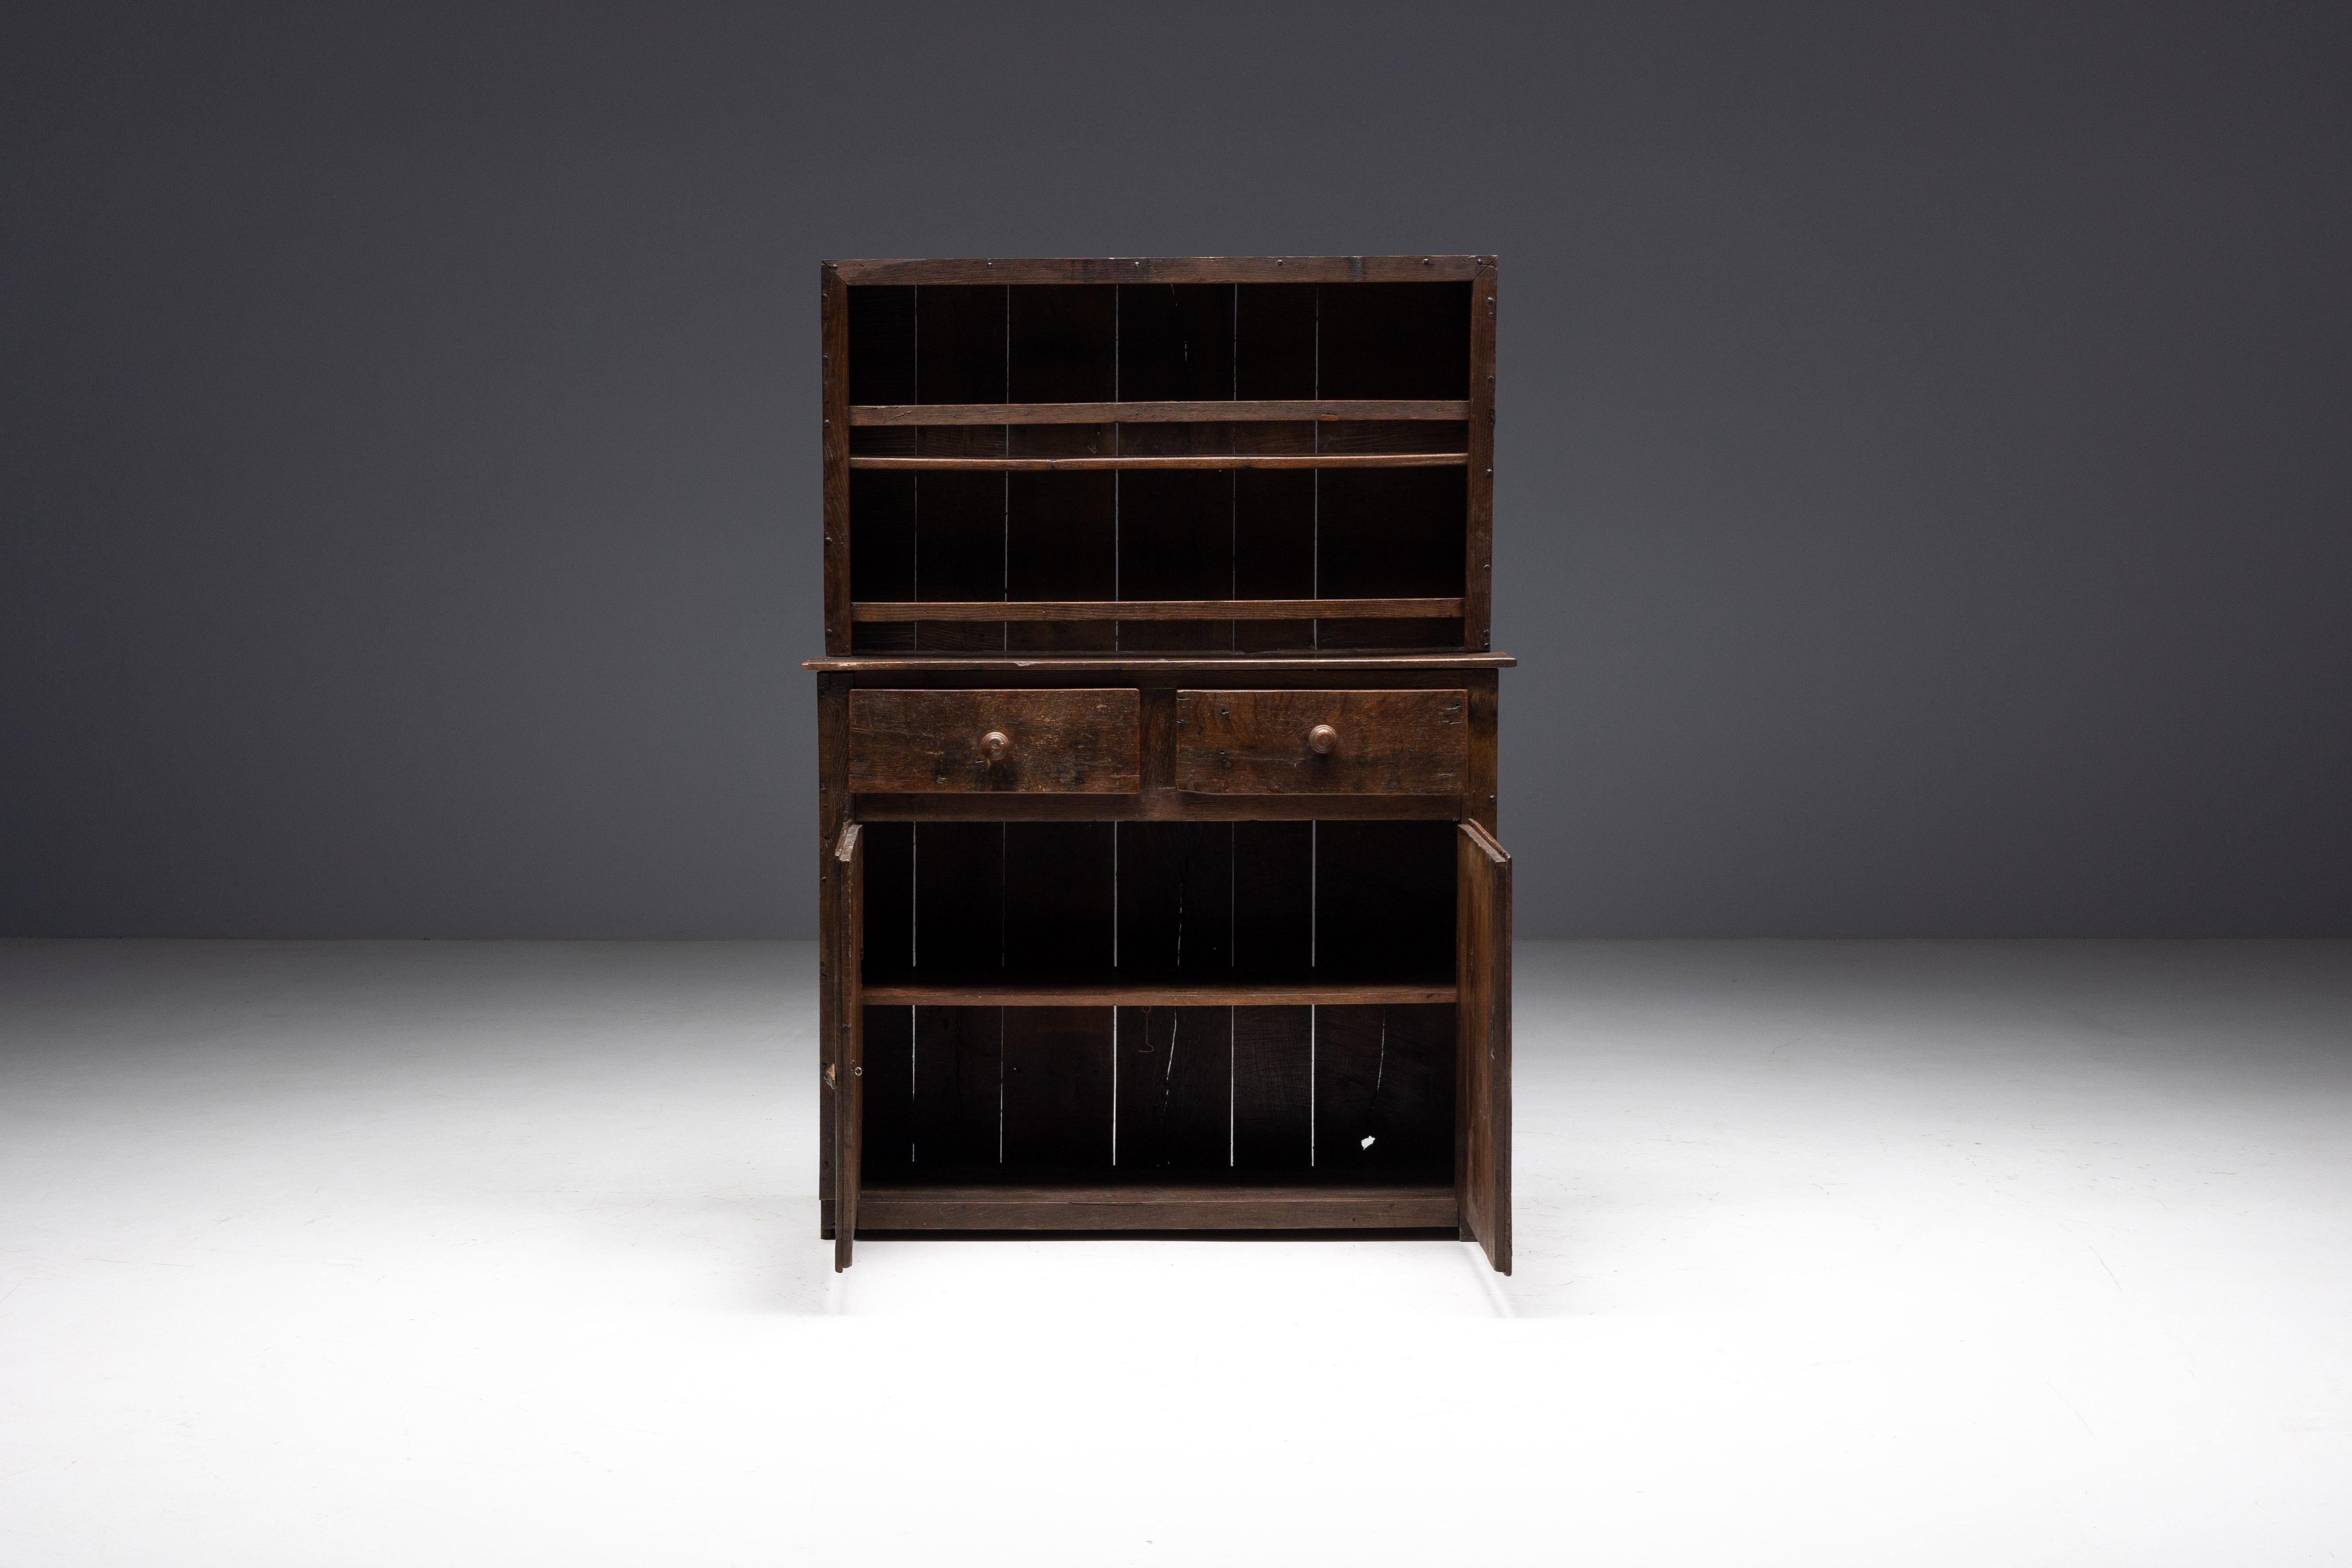 Rustic Travail Populaire Cupboard, France, Early 19th Century For Sale 2